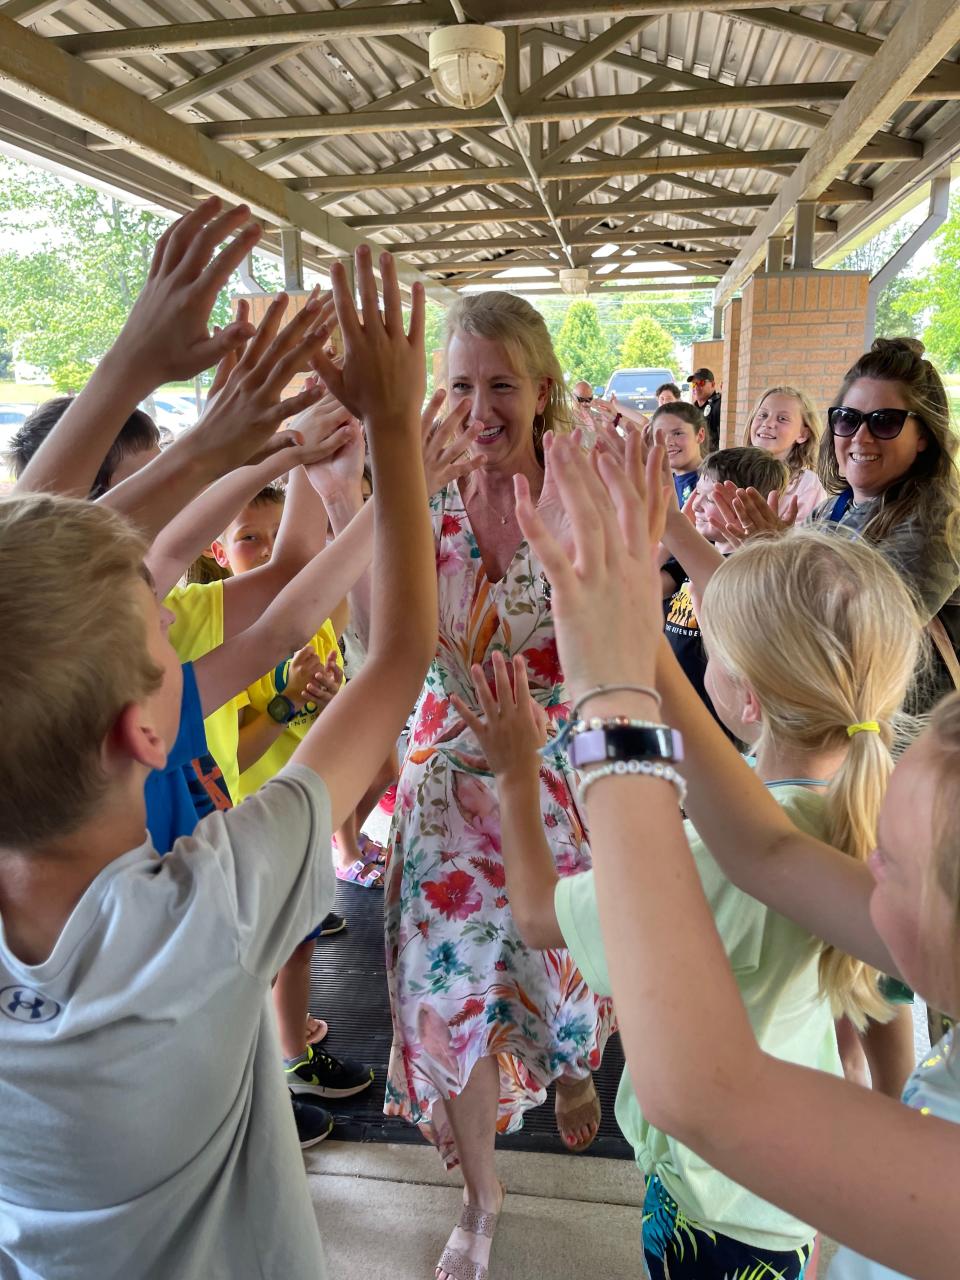 Glenn C. Marlow's students and faculty have a big welcome back for fourth grade teacher Karen Whiting after she was named Henderson County Public Schools' Teacher of the Year on Thursday.